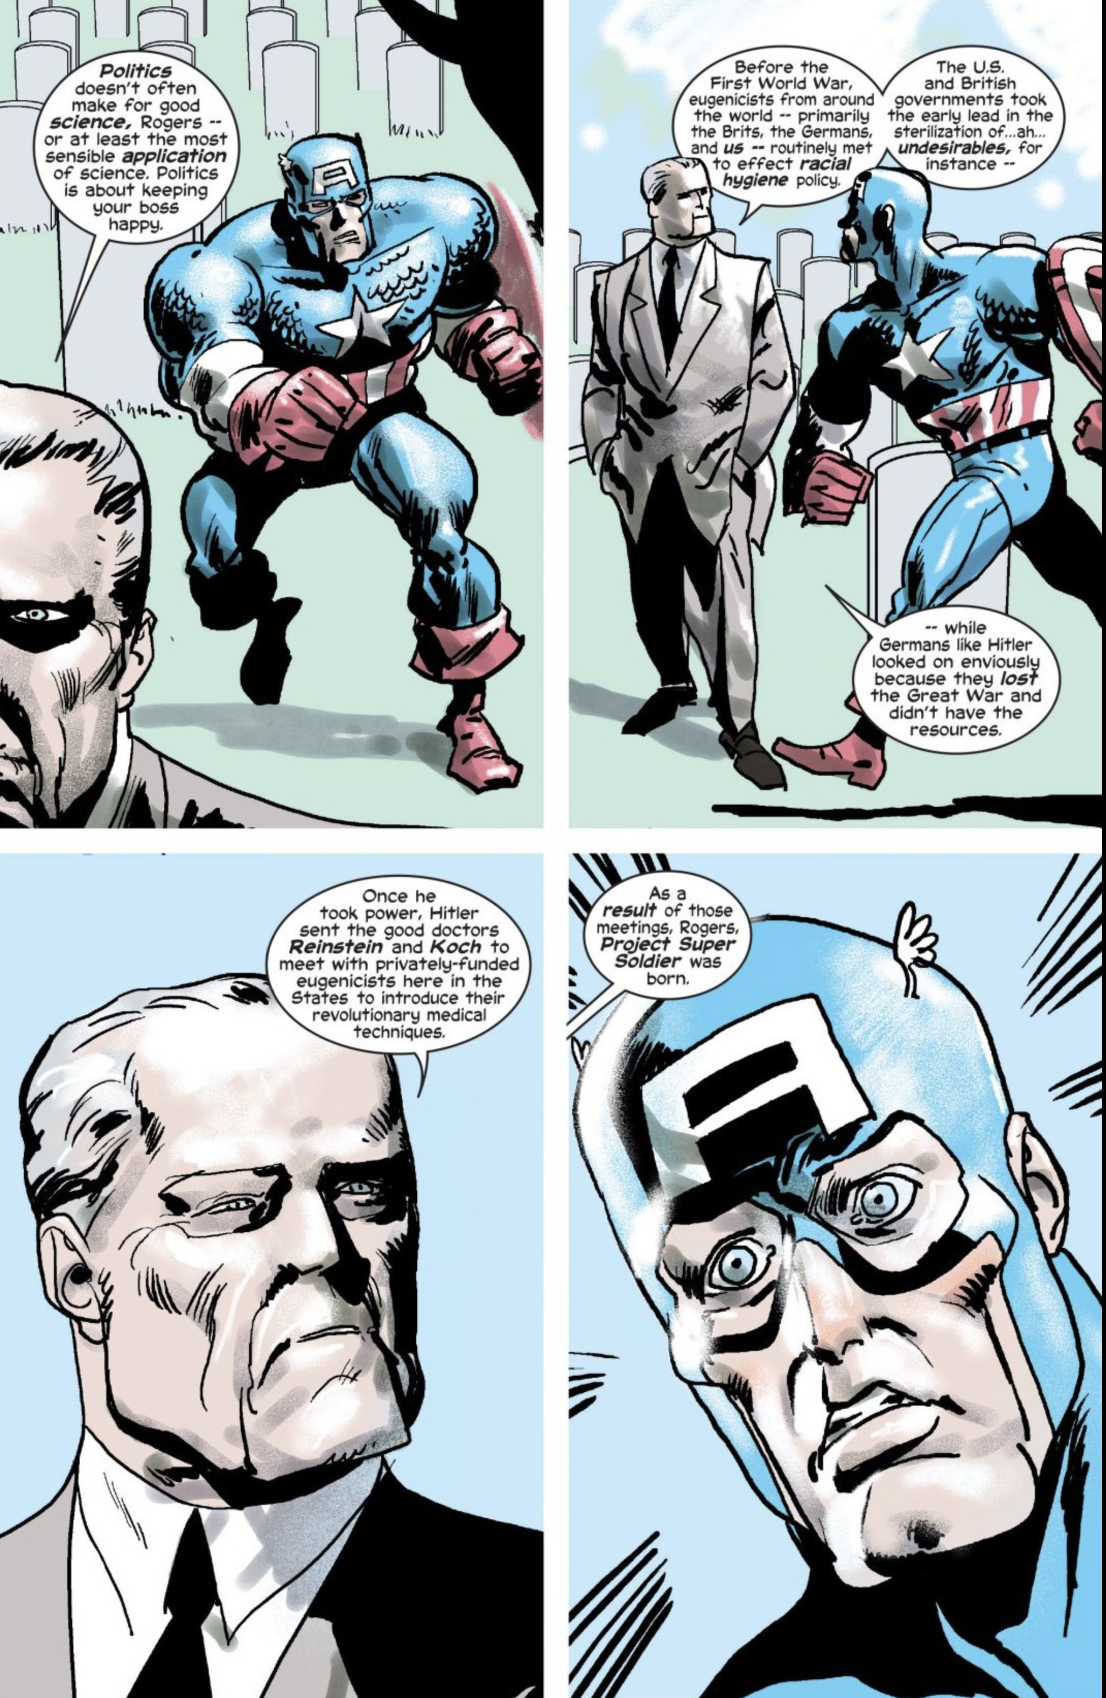 Cap learns the truth